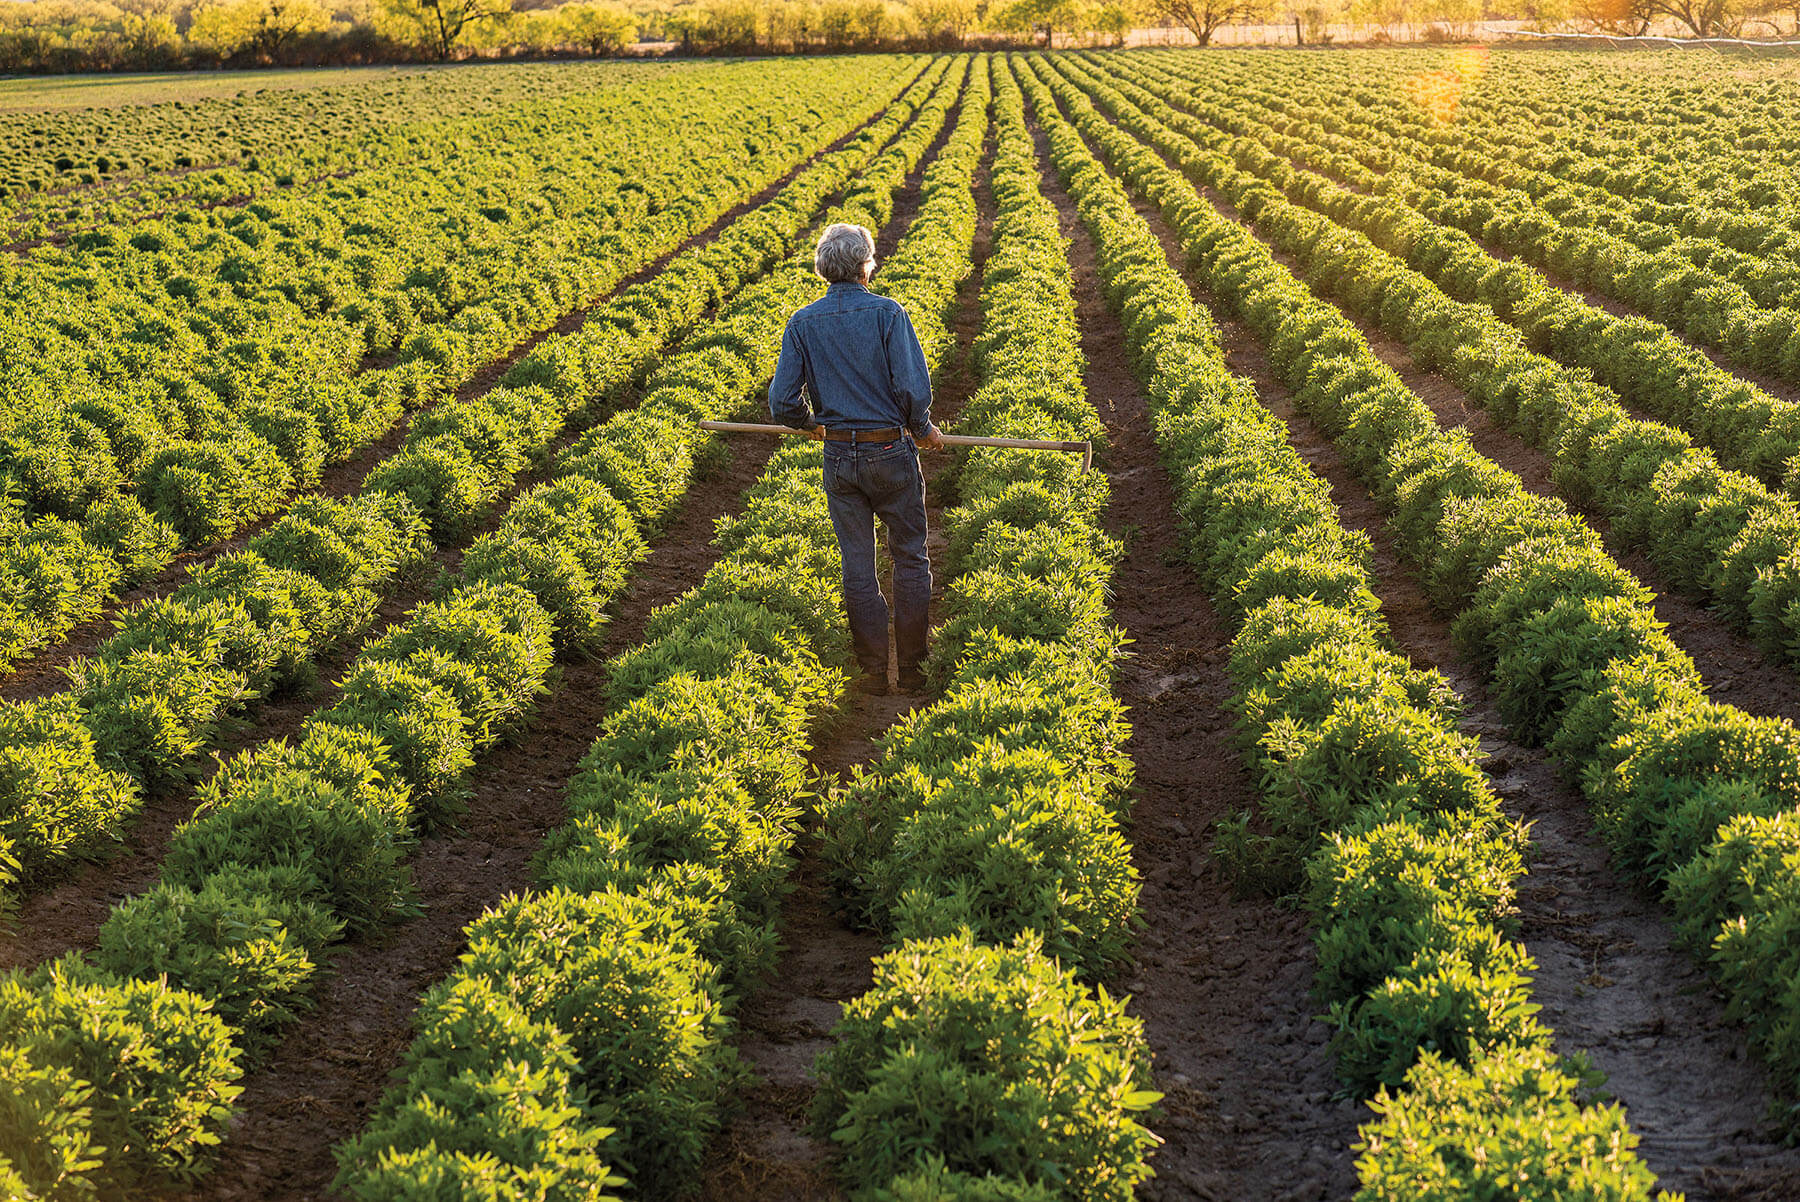 A person walks through large rows of plants in a golden sunlit setting